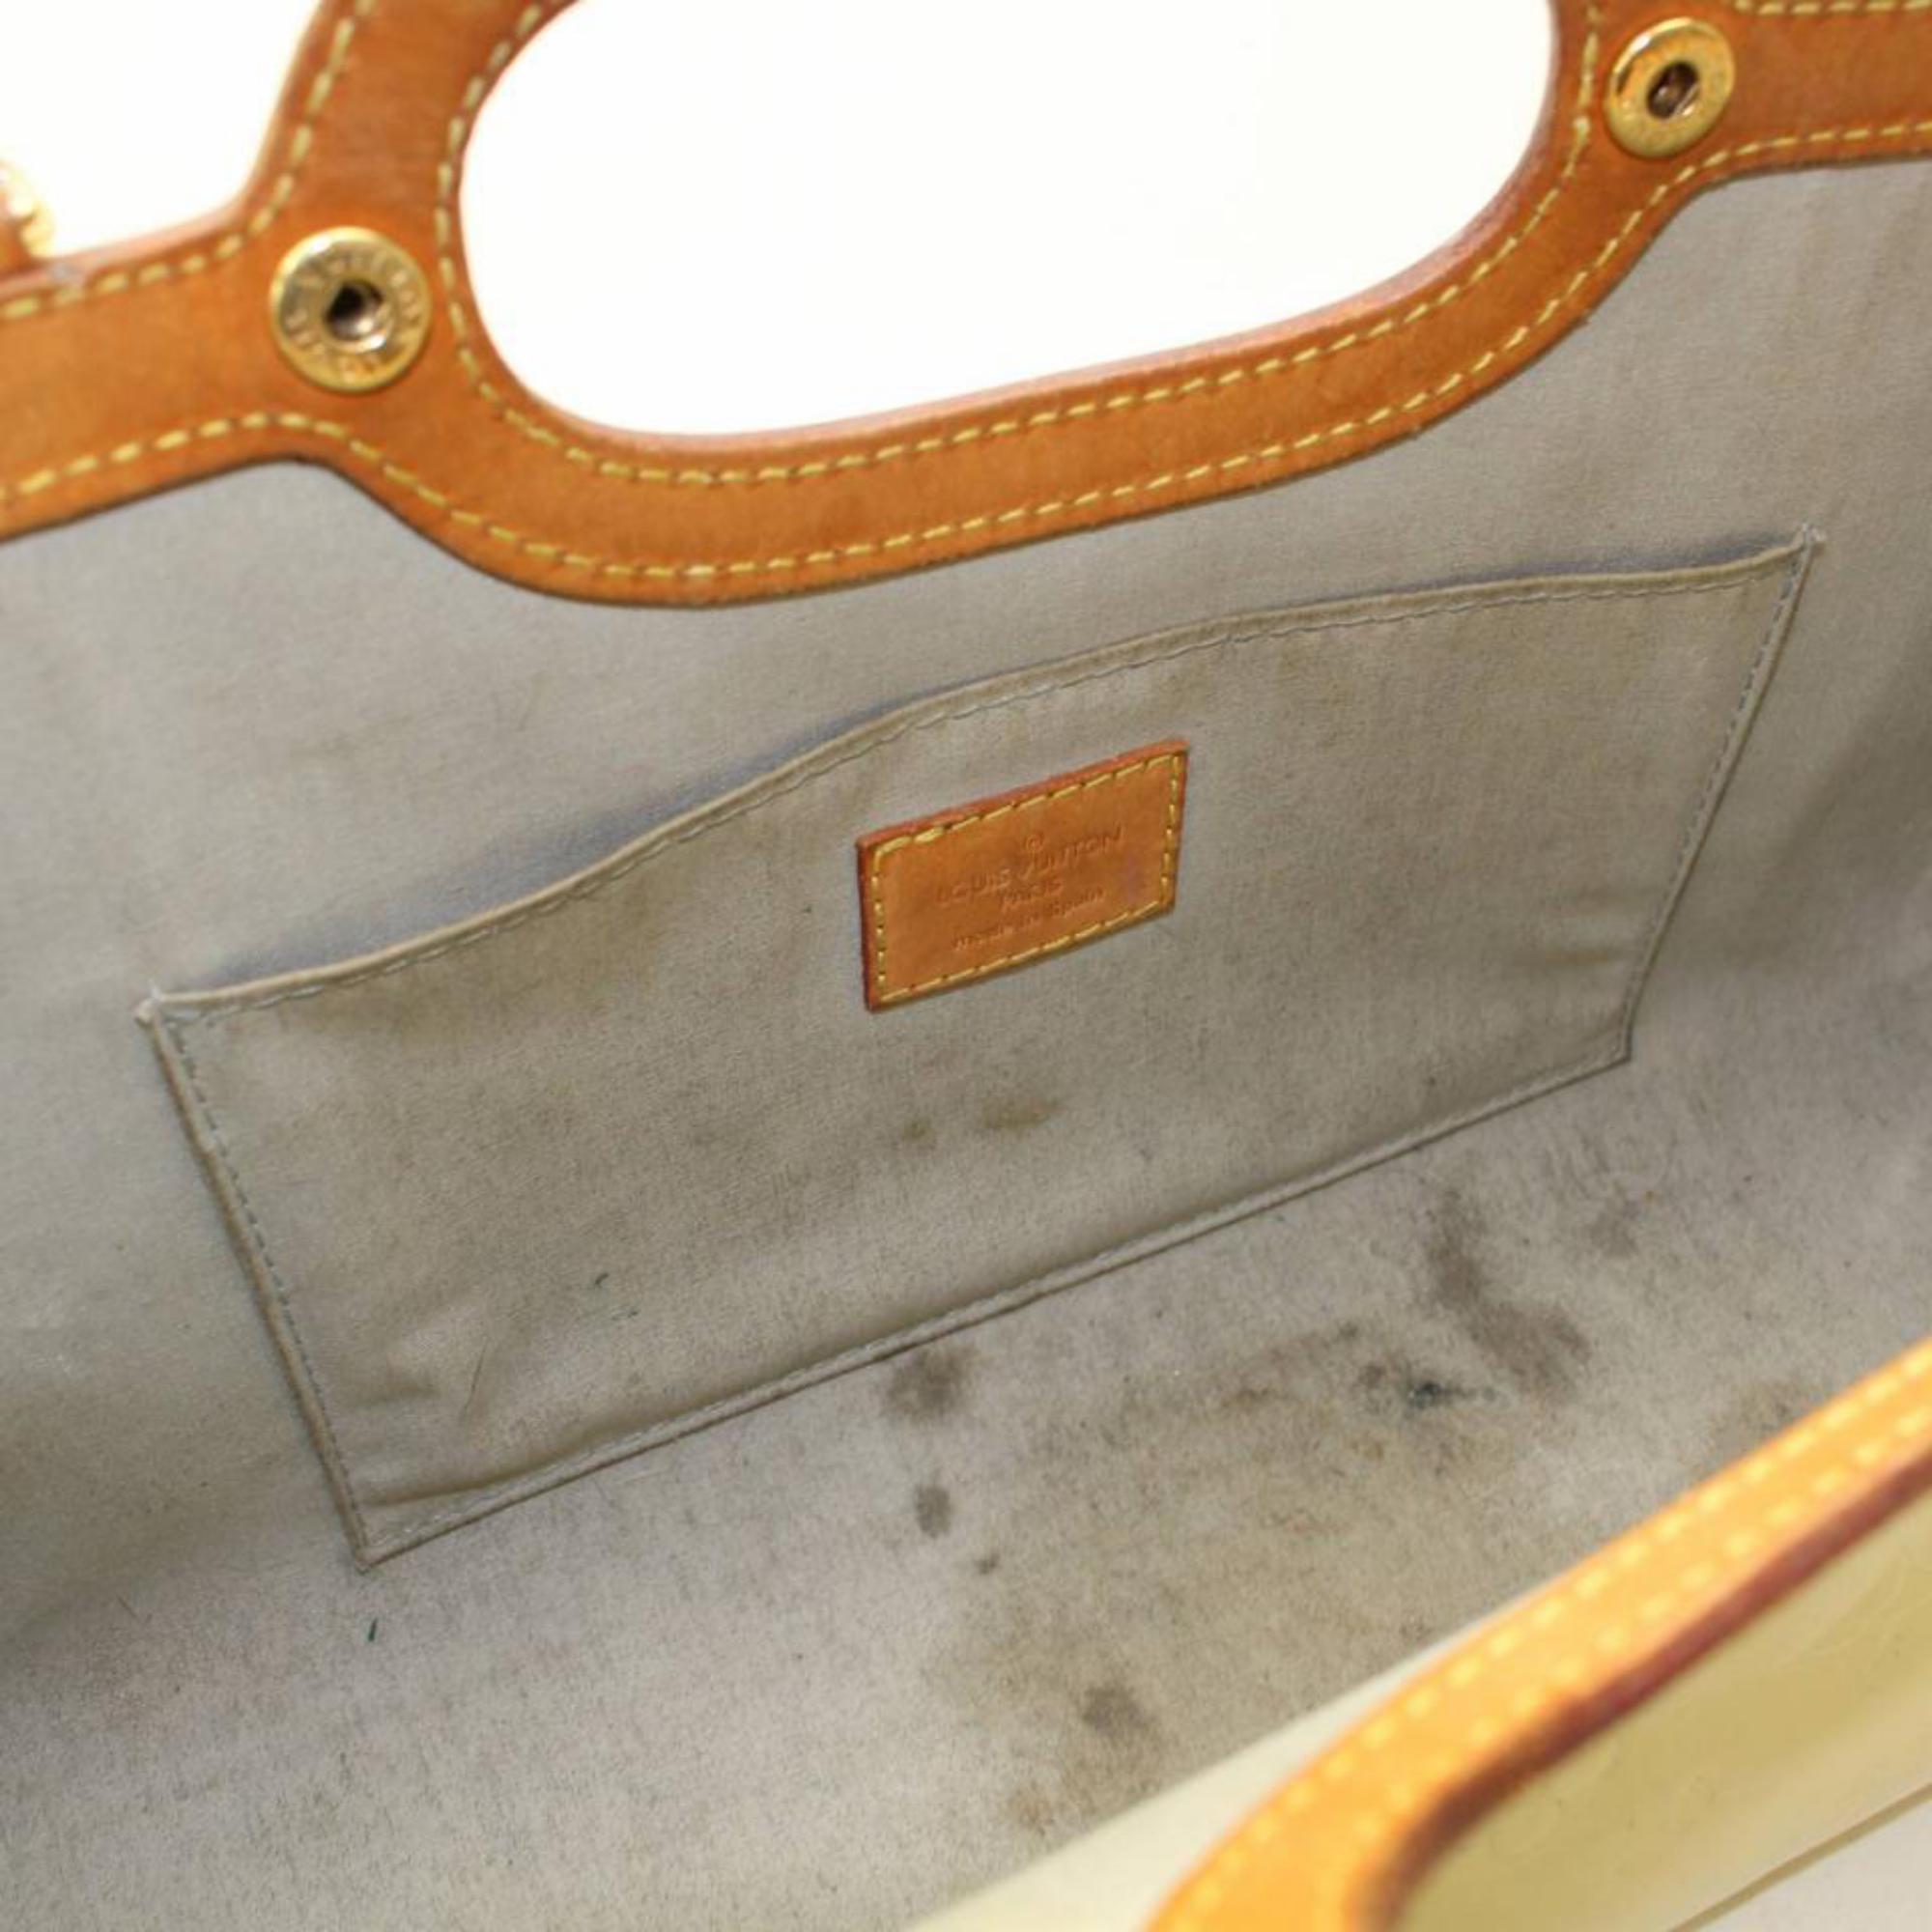 Louis Vuitton Roxbury Vernis Drive 2way 866147 Cream Patent Leather Shoulder Bag In Good Condition For Sale In Forest Hills, NY